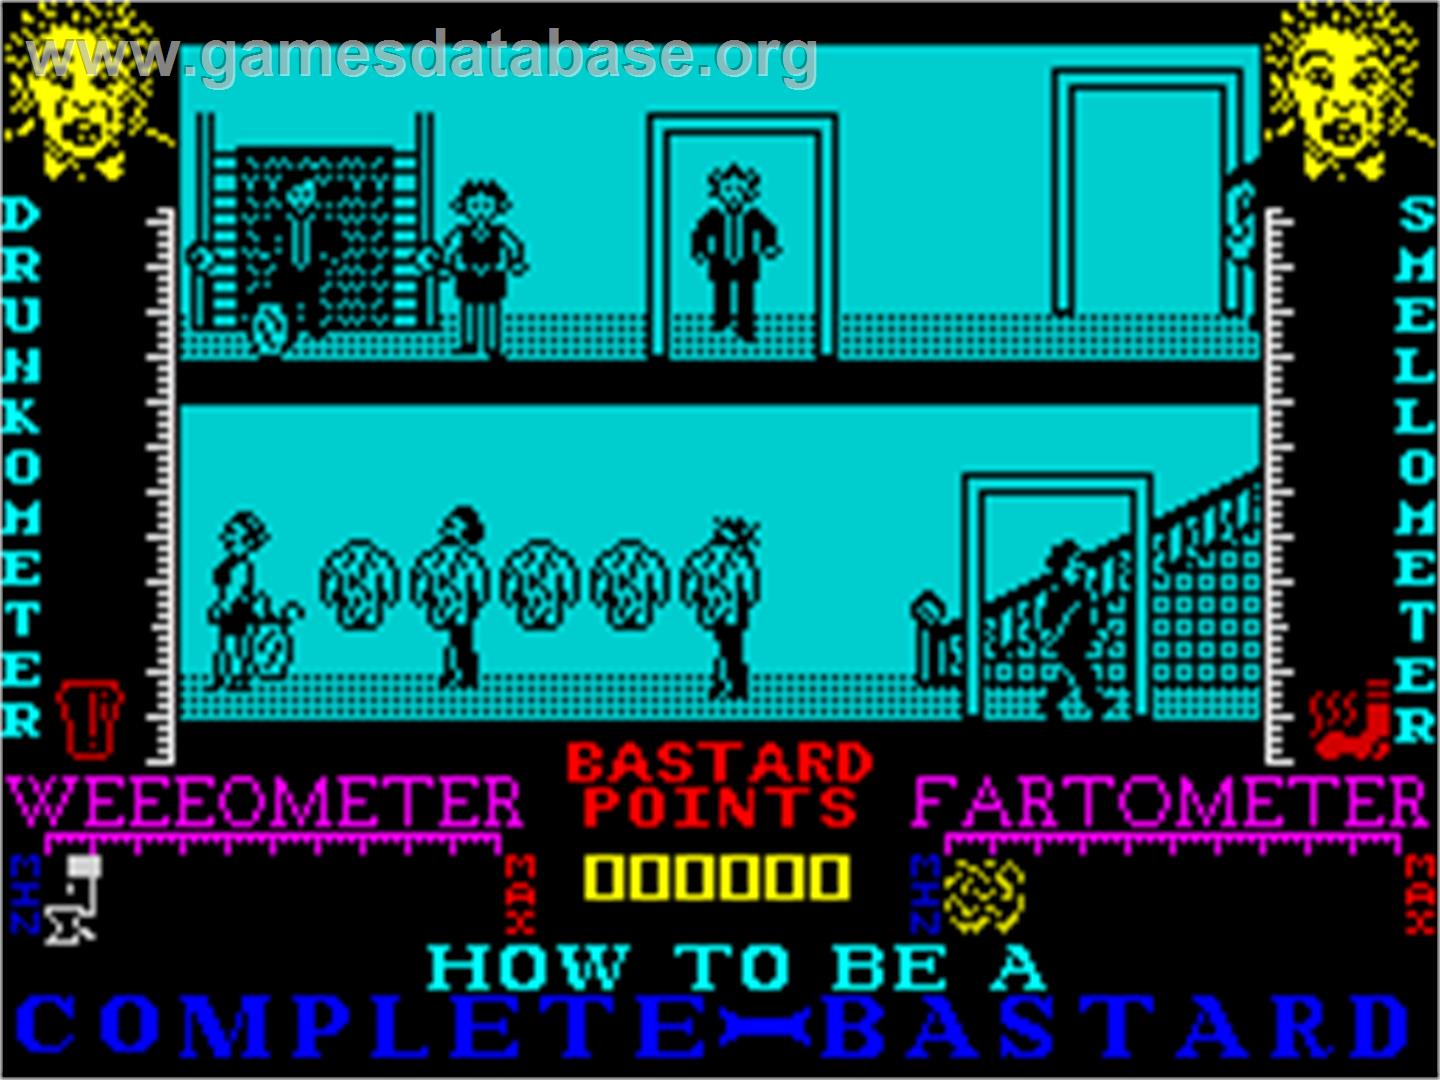 How to be a Complete Bastard - Sinclair ZX Spectrum - Artwork - In Game